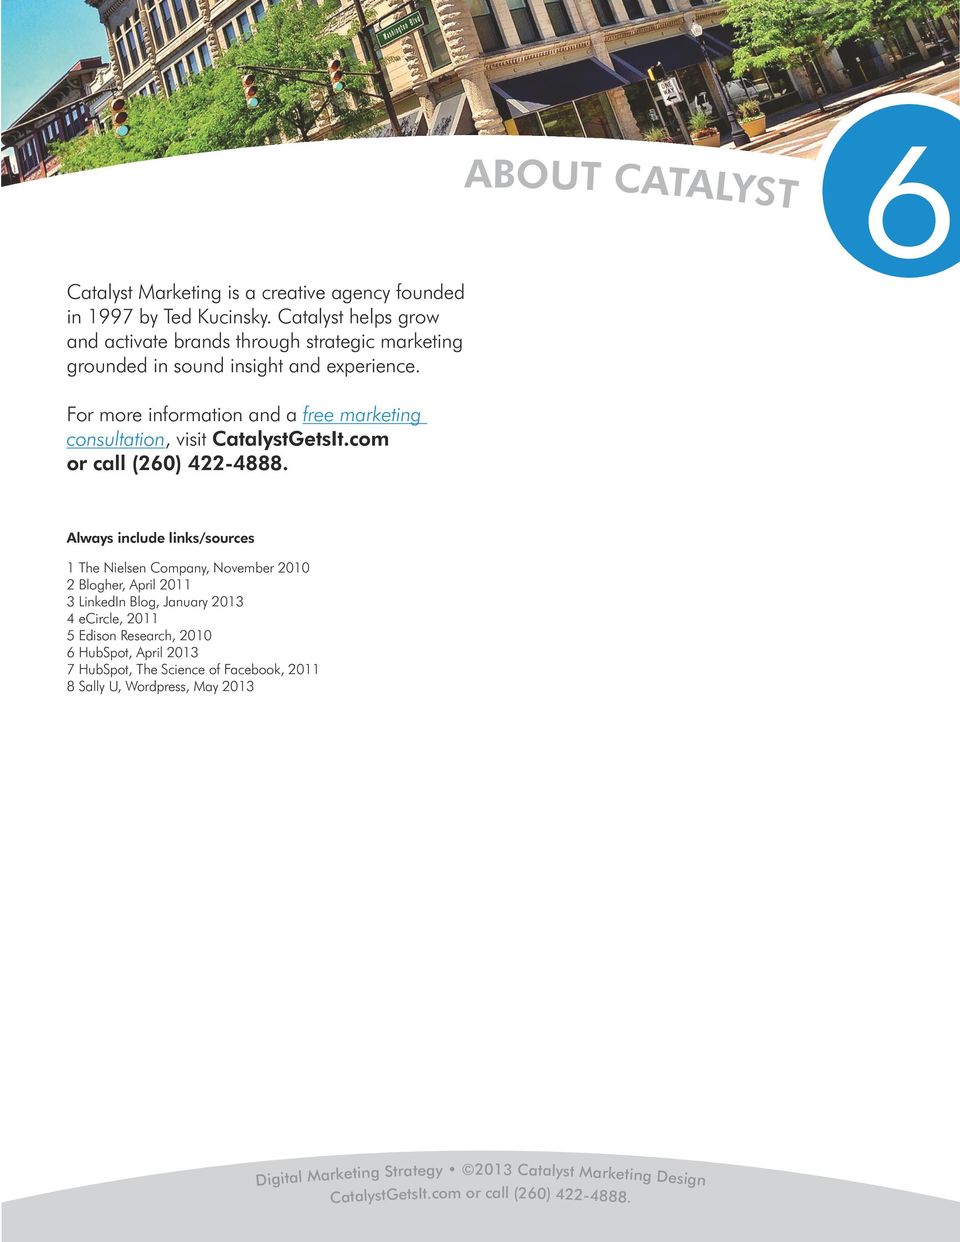 For more information and a free marketing consultation, visit CatalystGetsIt.com or call (260) 422-4888.